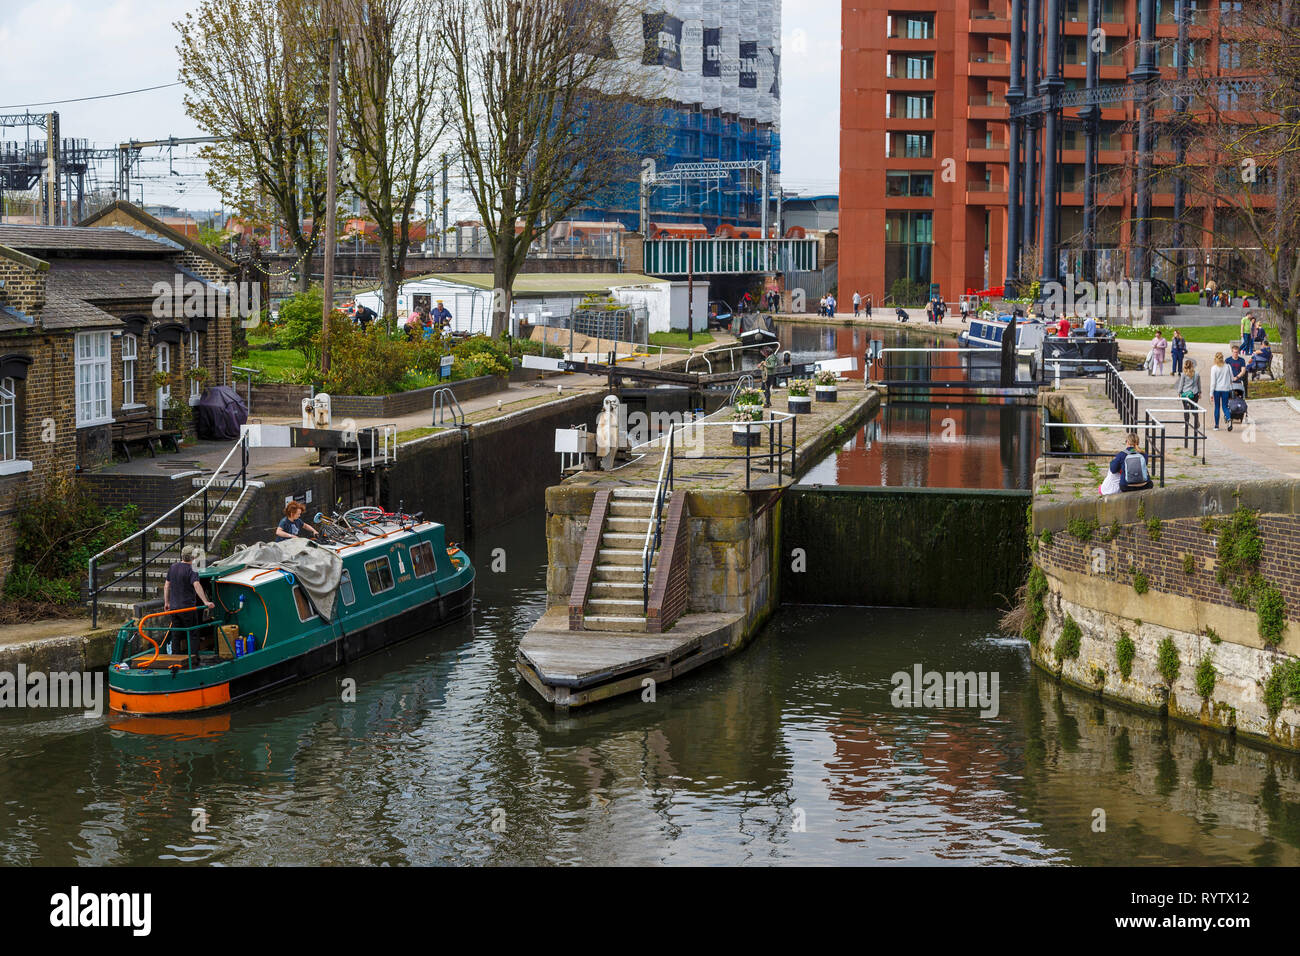 The 1819 St Pancras Lock on the Regent's Canal in London, UK. Popular destination for tourists. Stock Photo